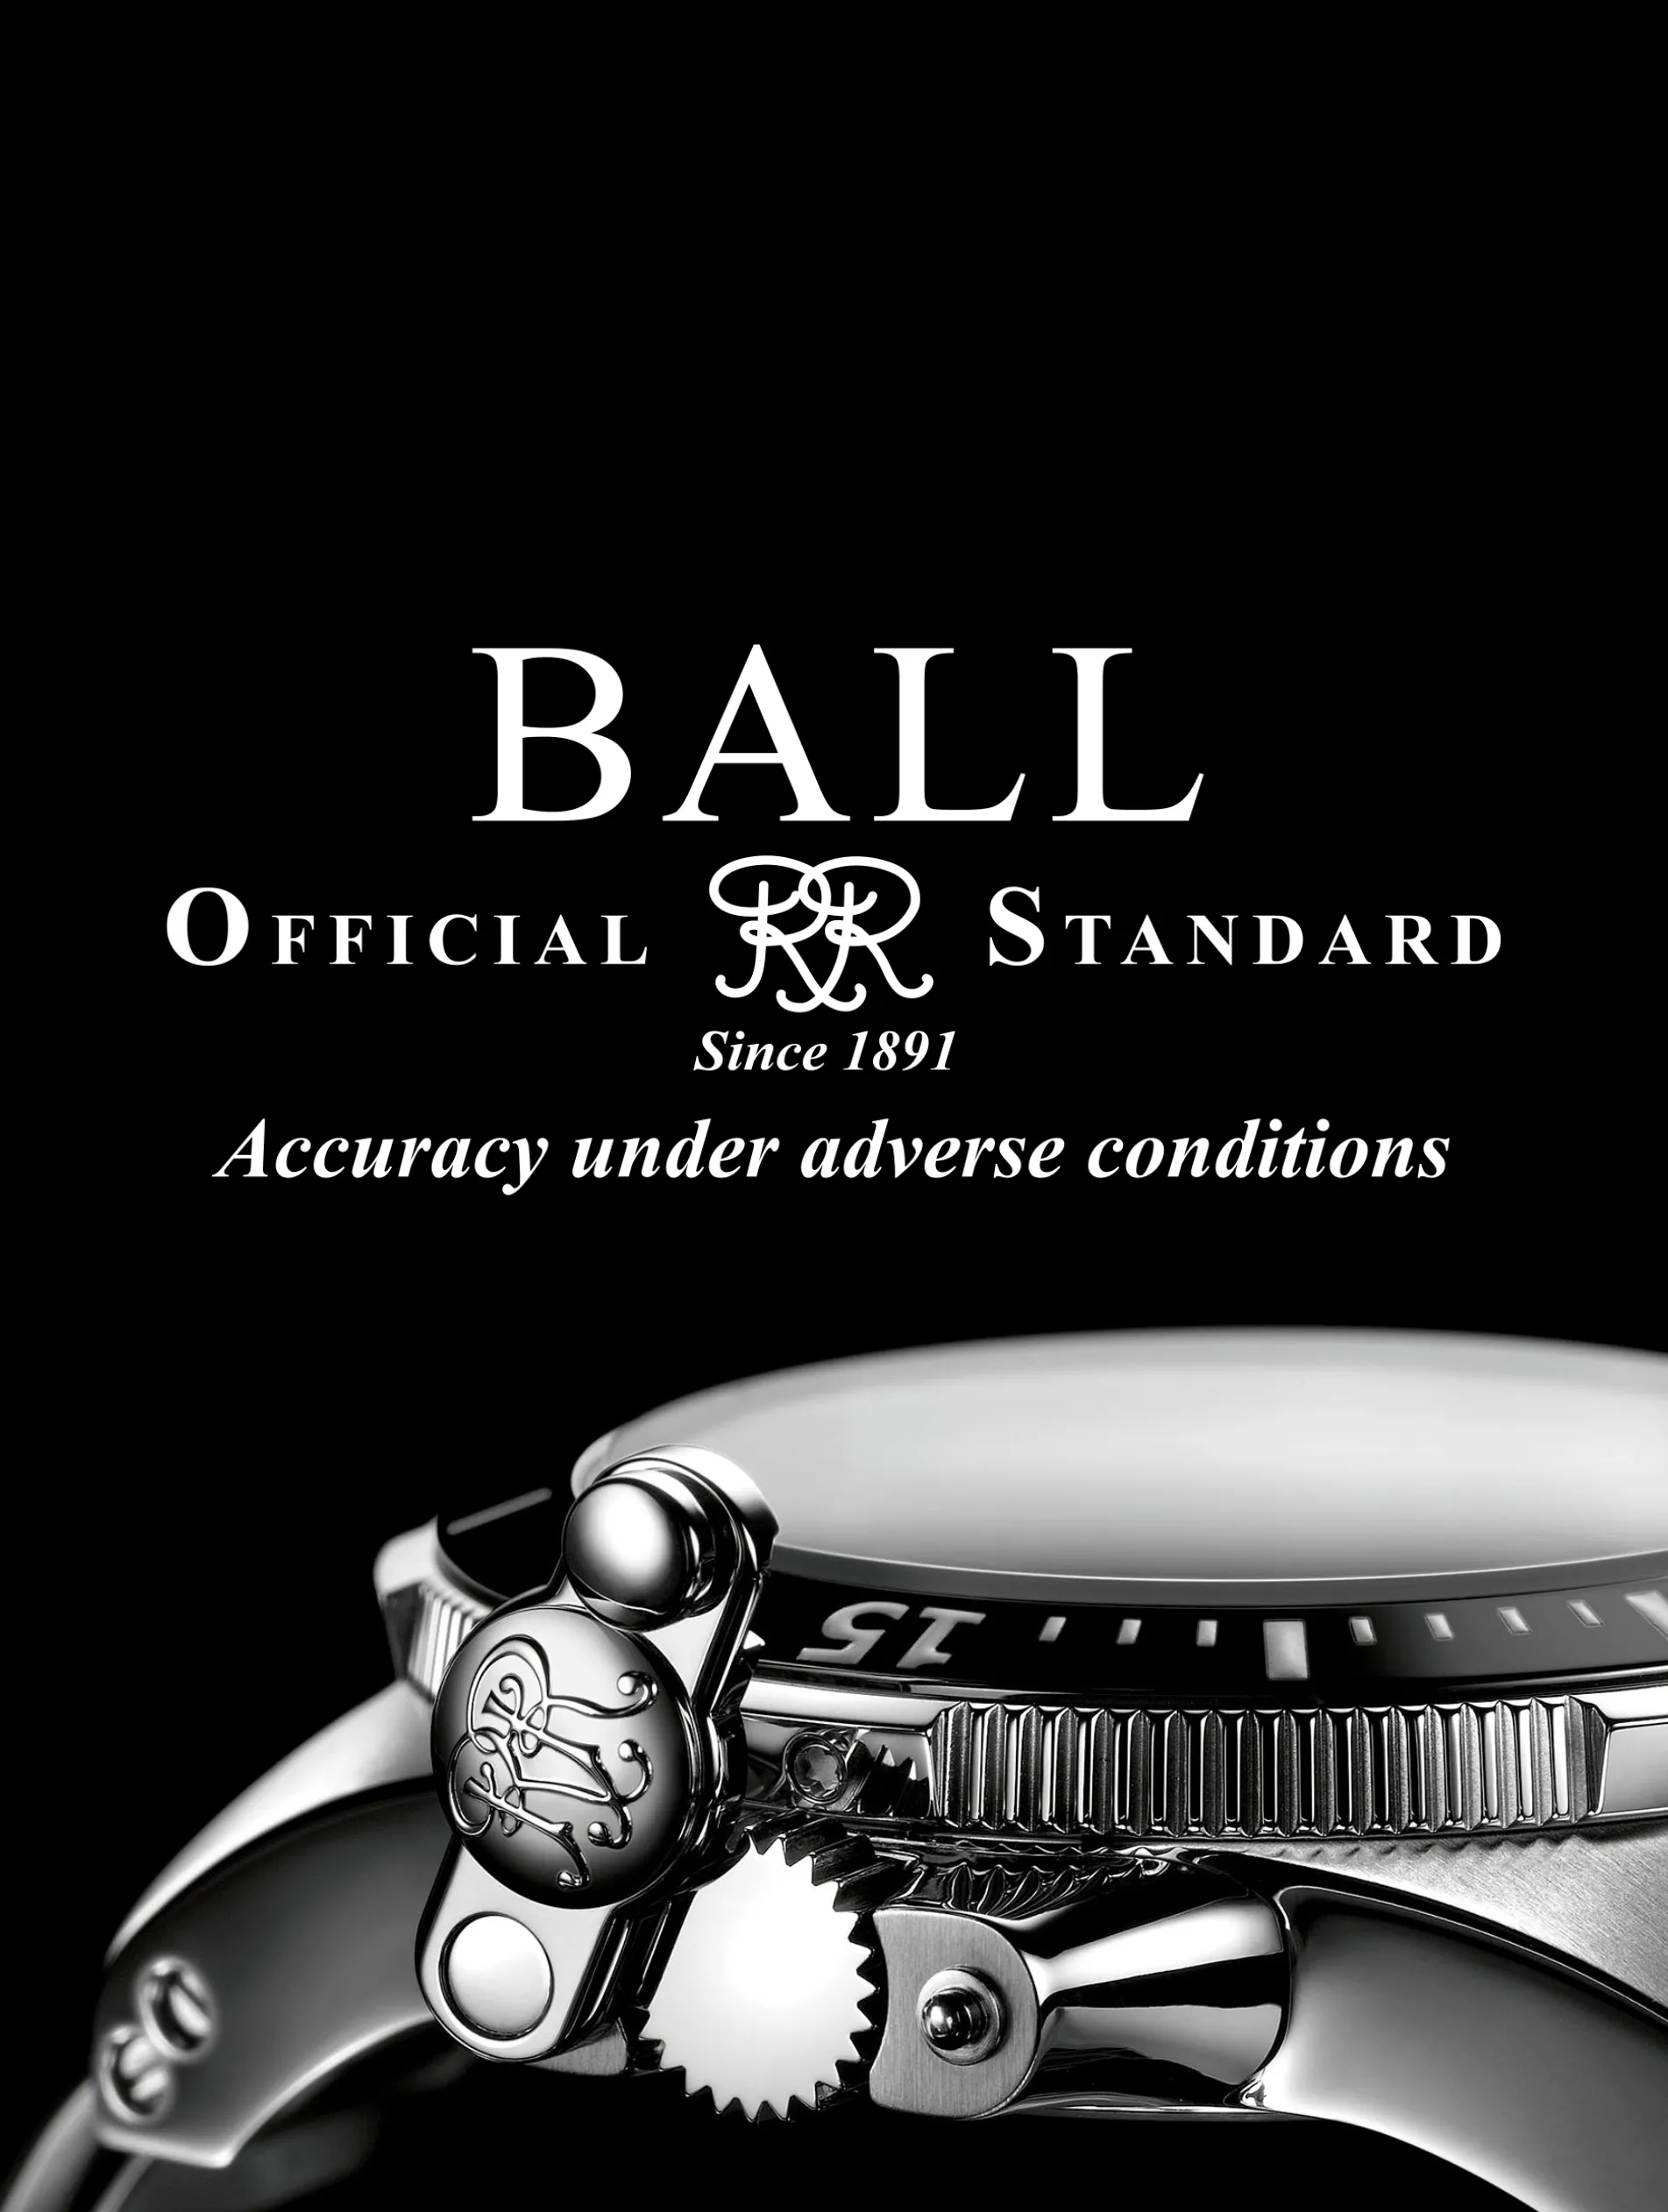 Shop our collection of BALL watches online or at our store in Avon Lake, OH. For more, visit Peter & Co. Jewelers.